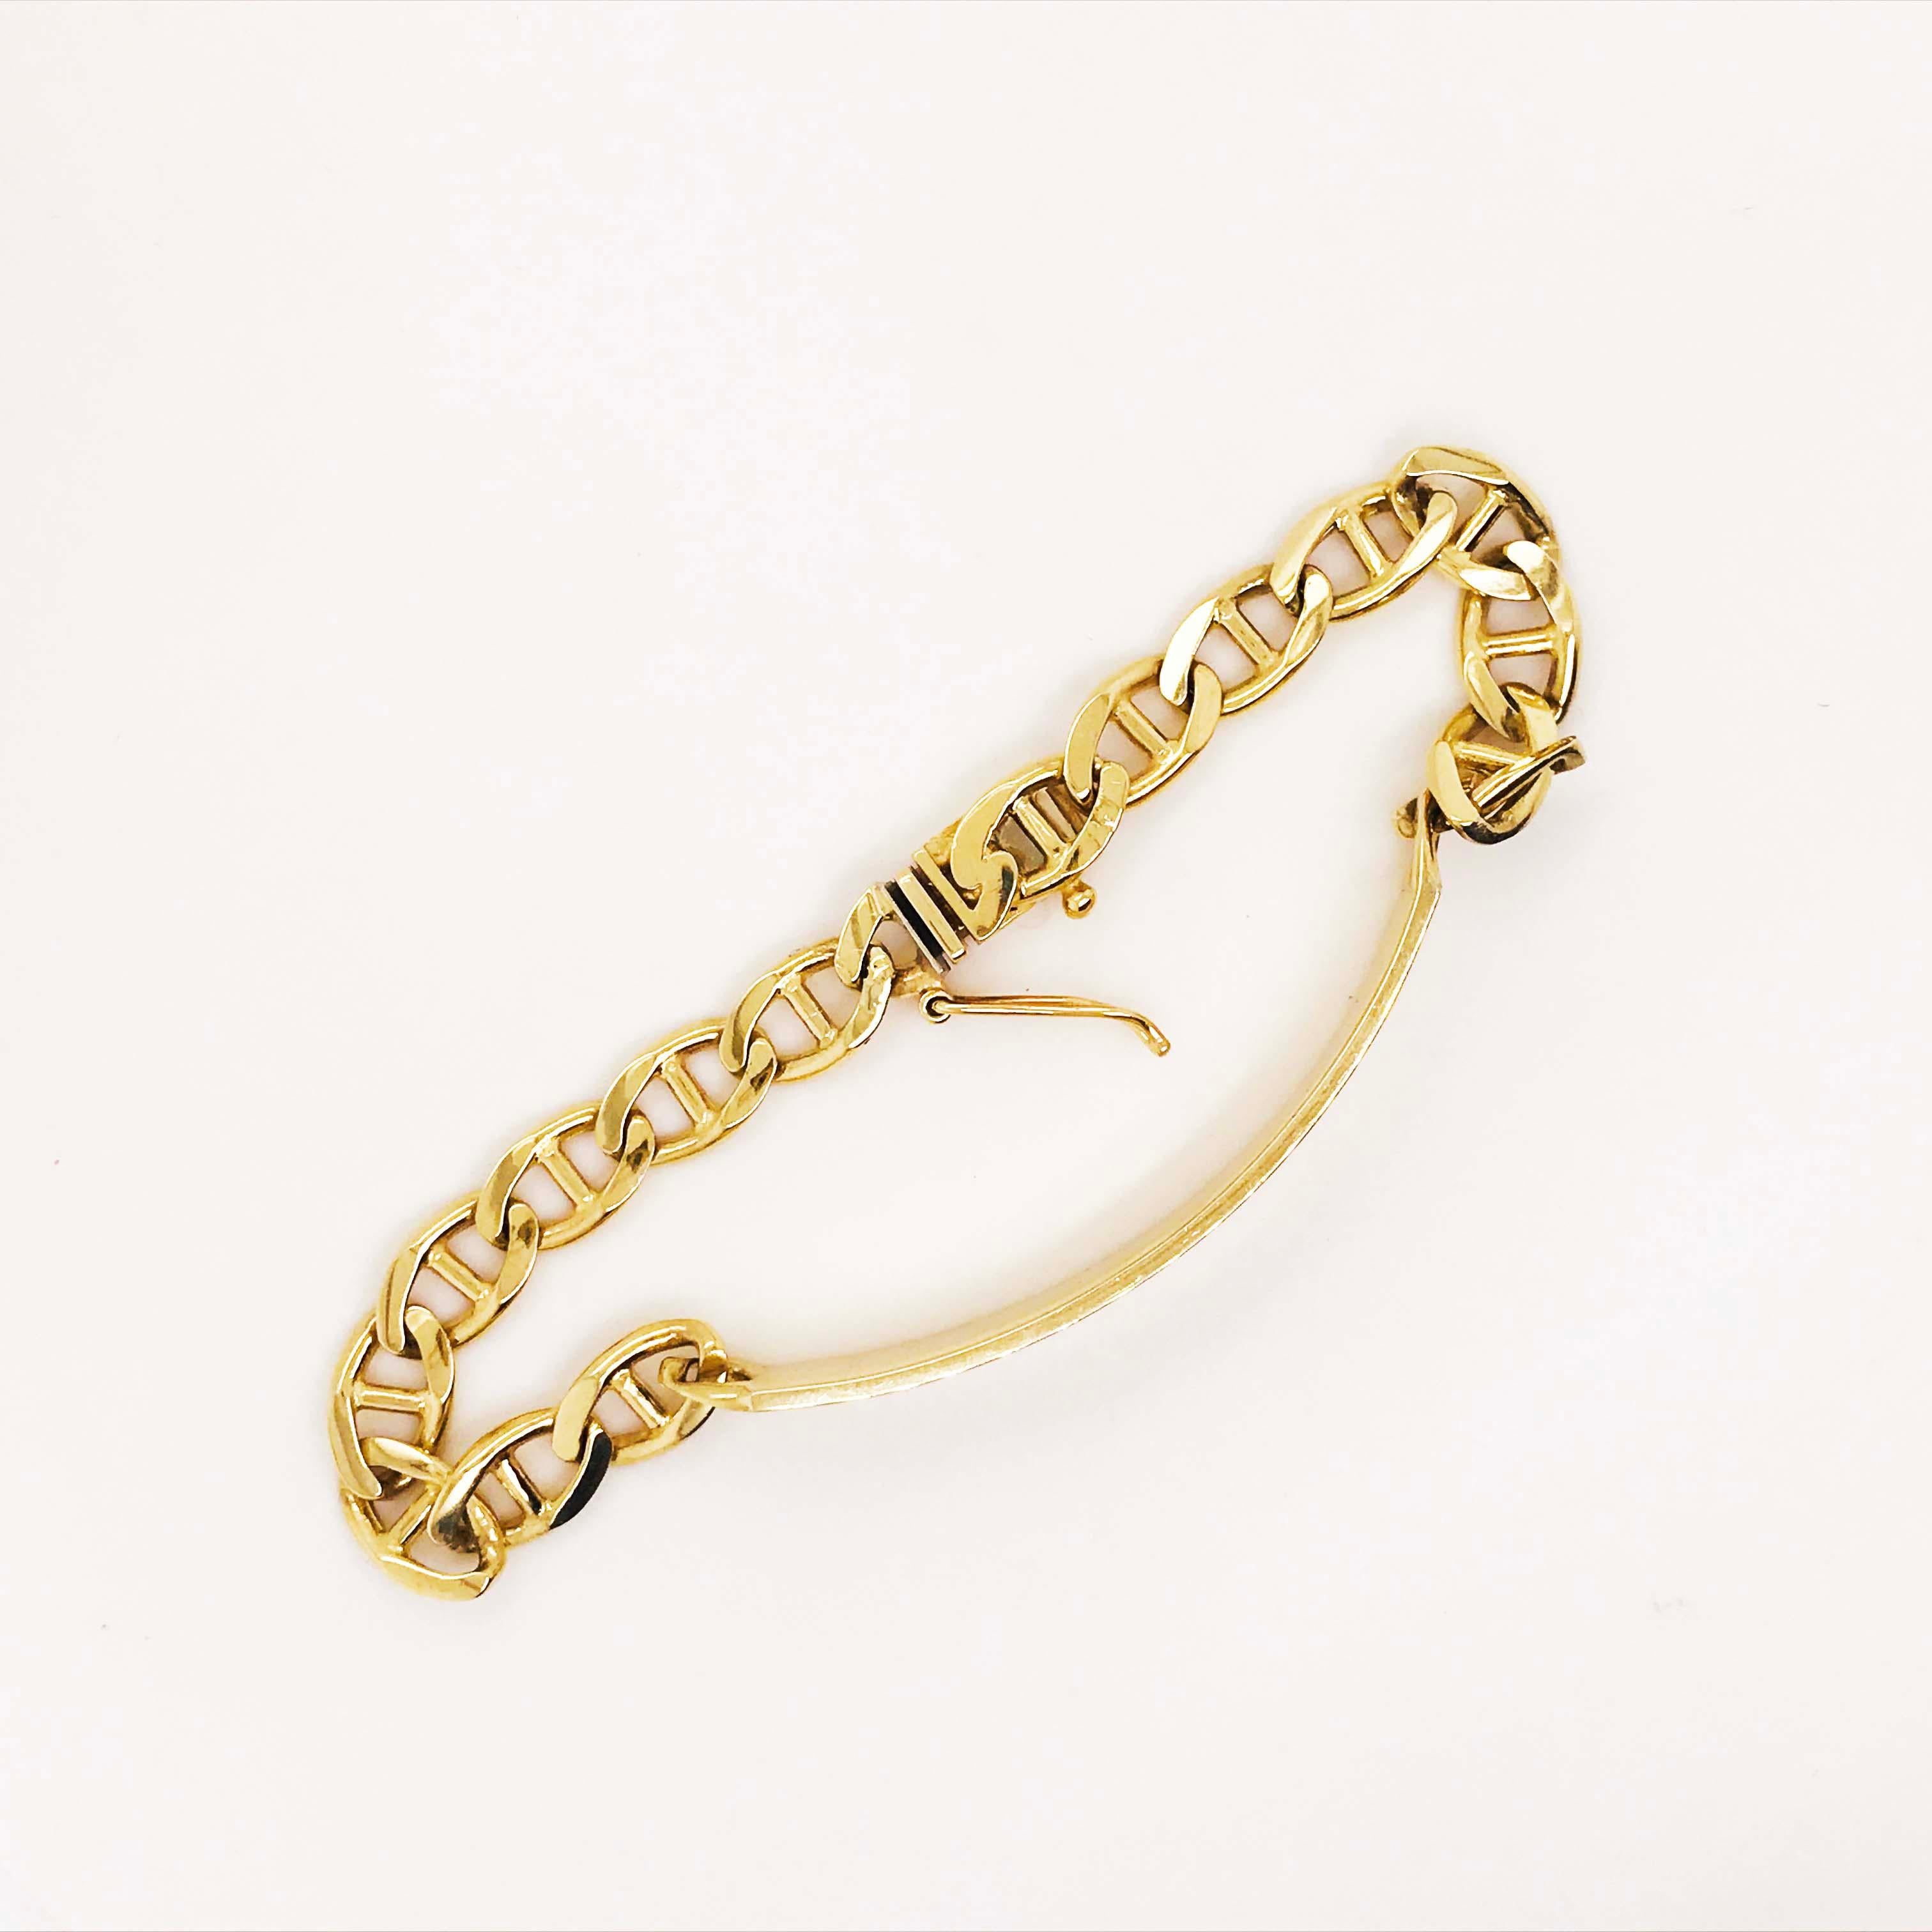 Engravable ID Bracelet in 14 kt Gold with Anchor Link Chain for Men or LG Woman 5